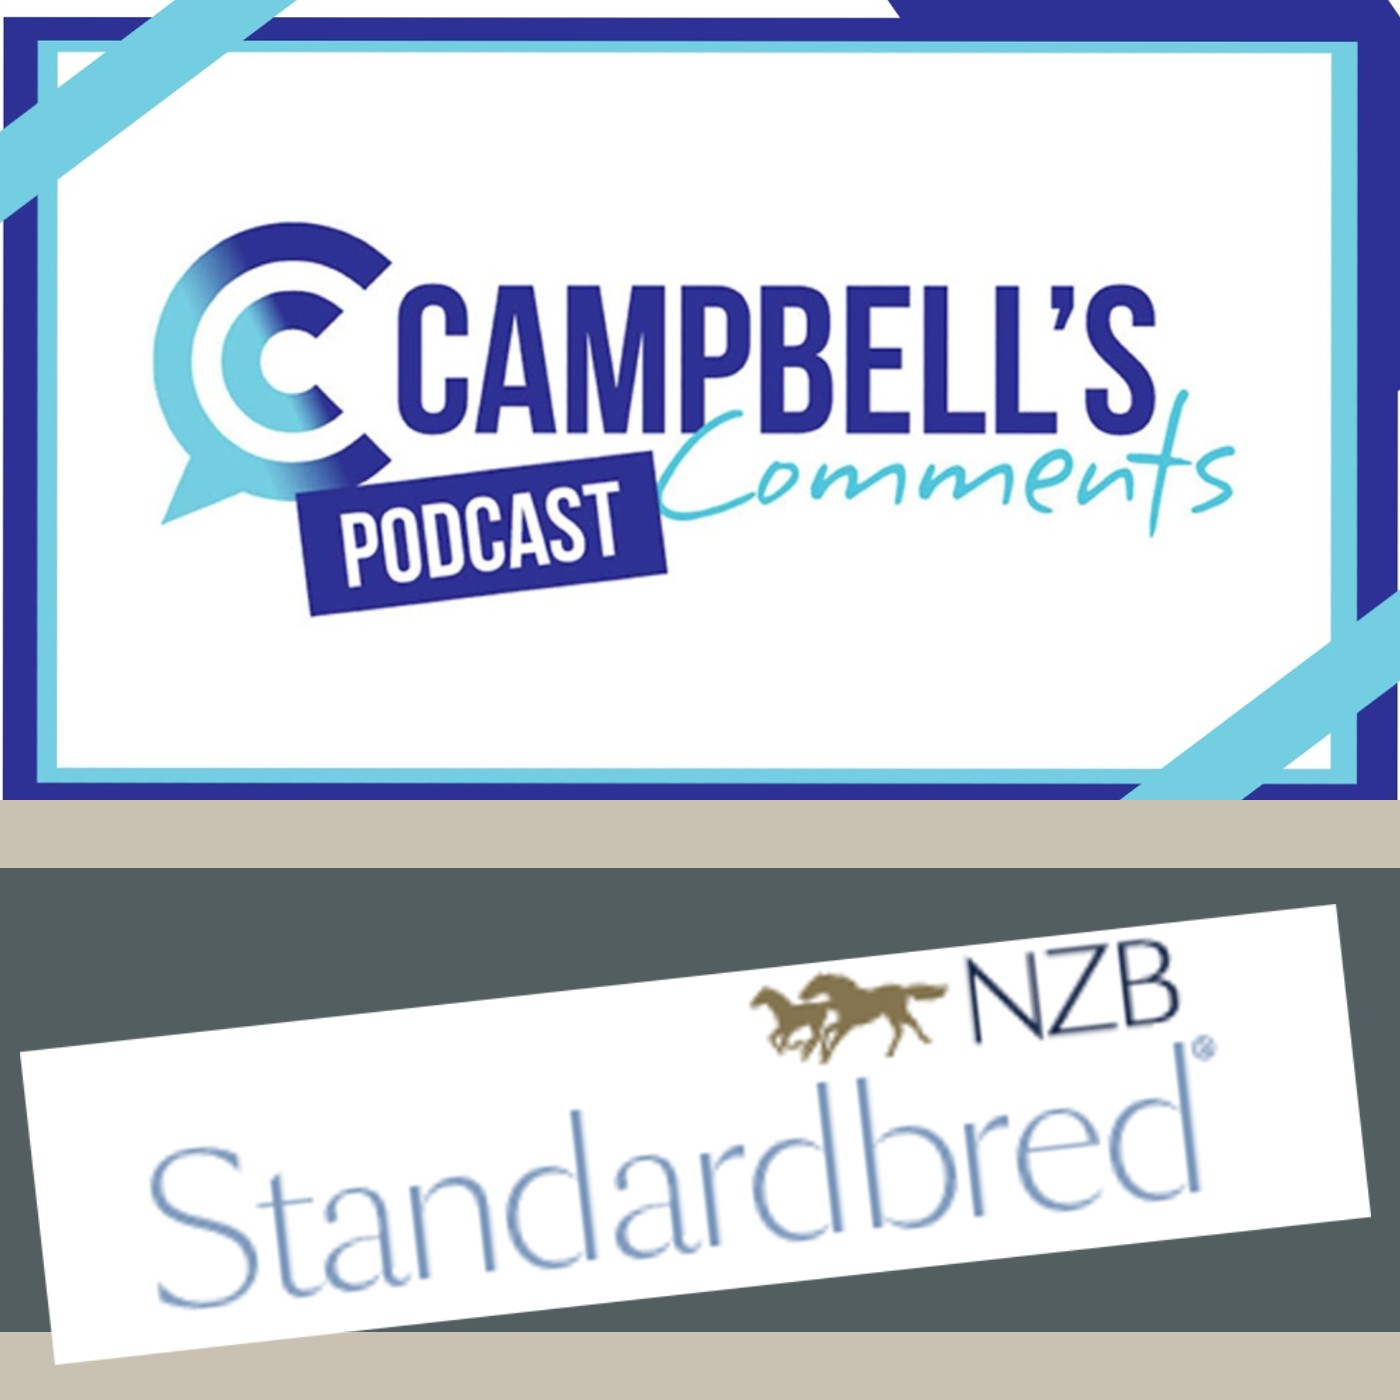 You are currently viewing 229: Campbells Comments with Duncan McPherson for NZB Standarbreds